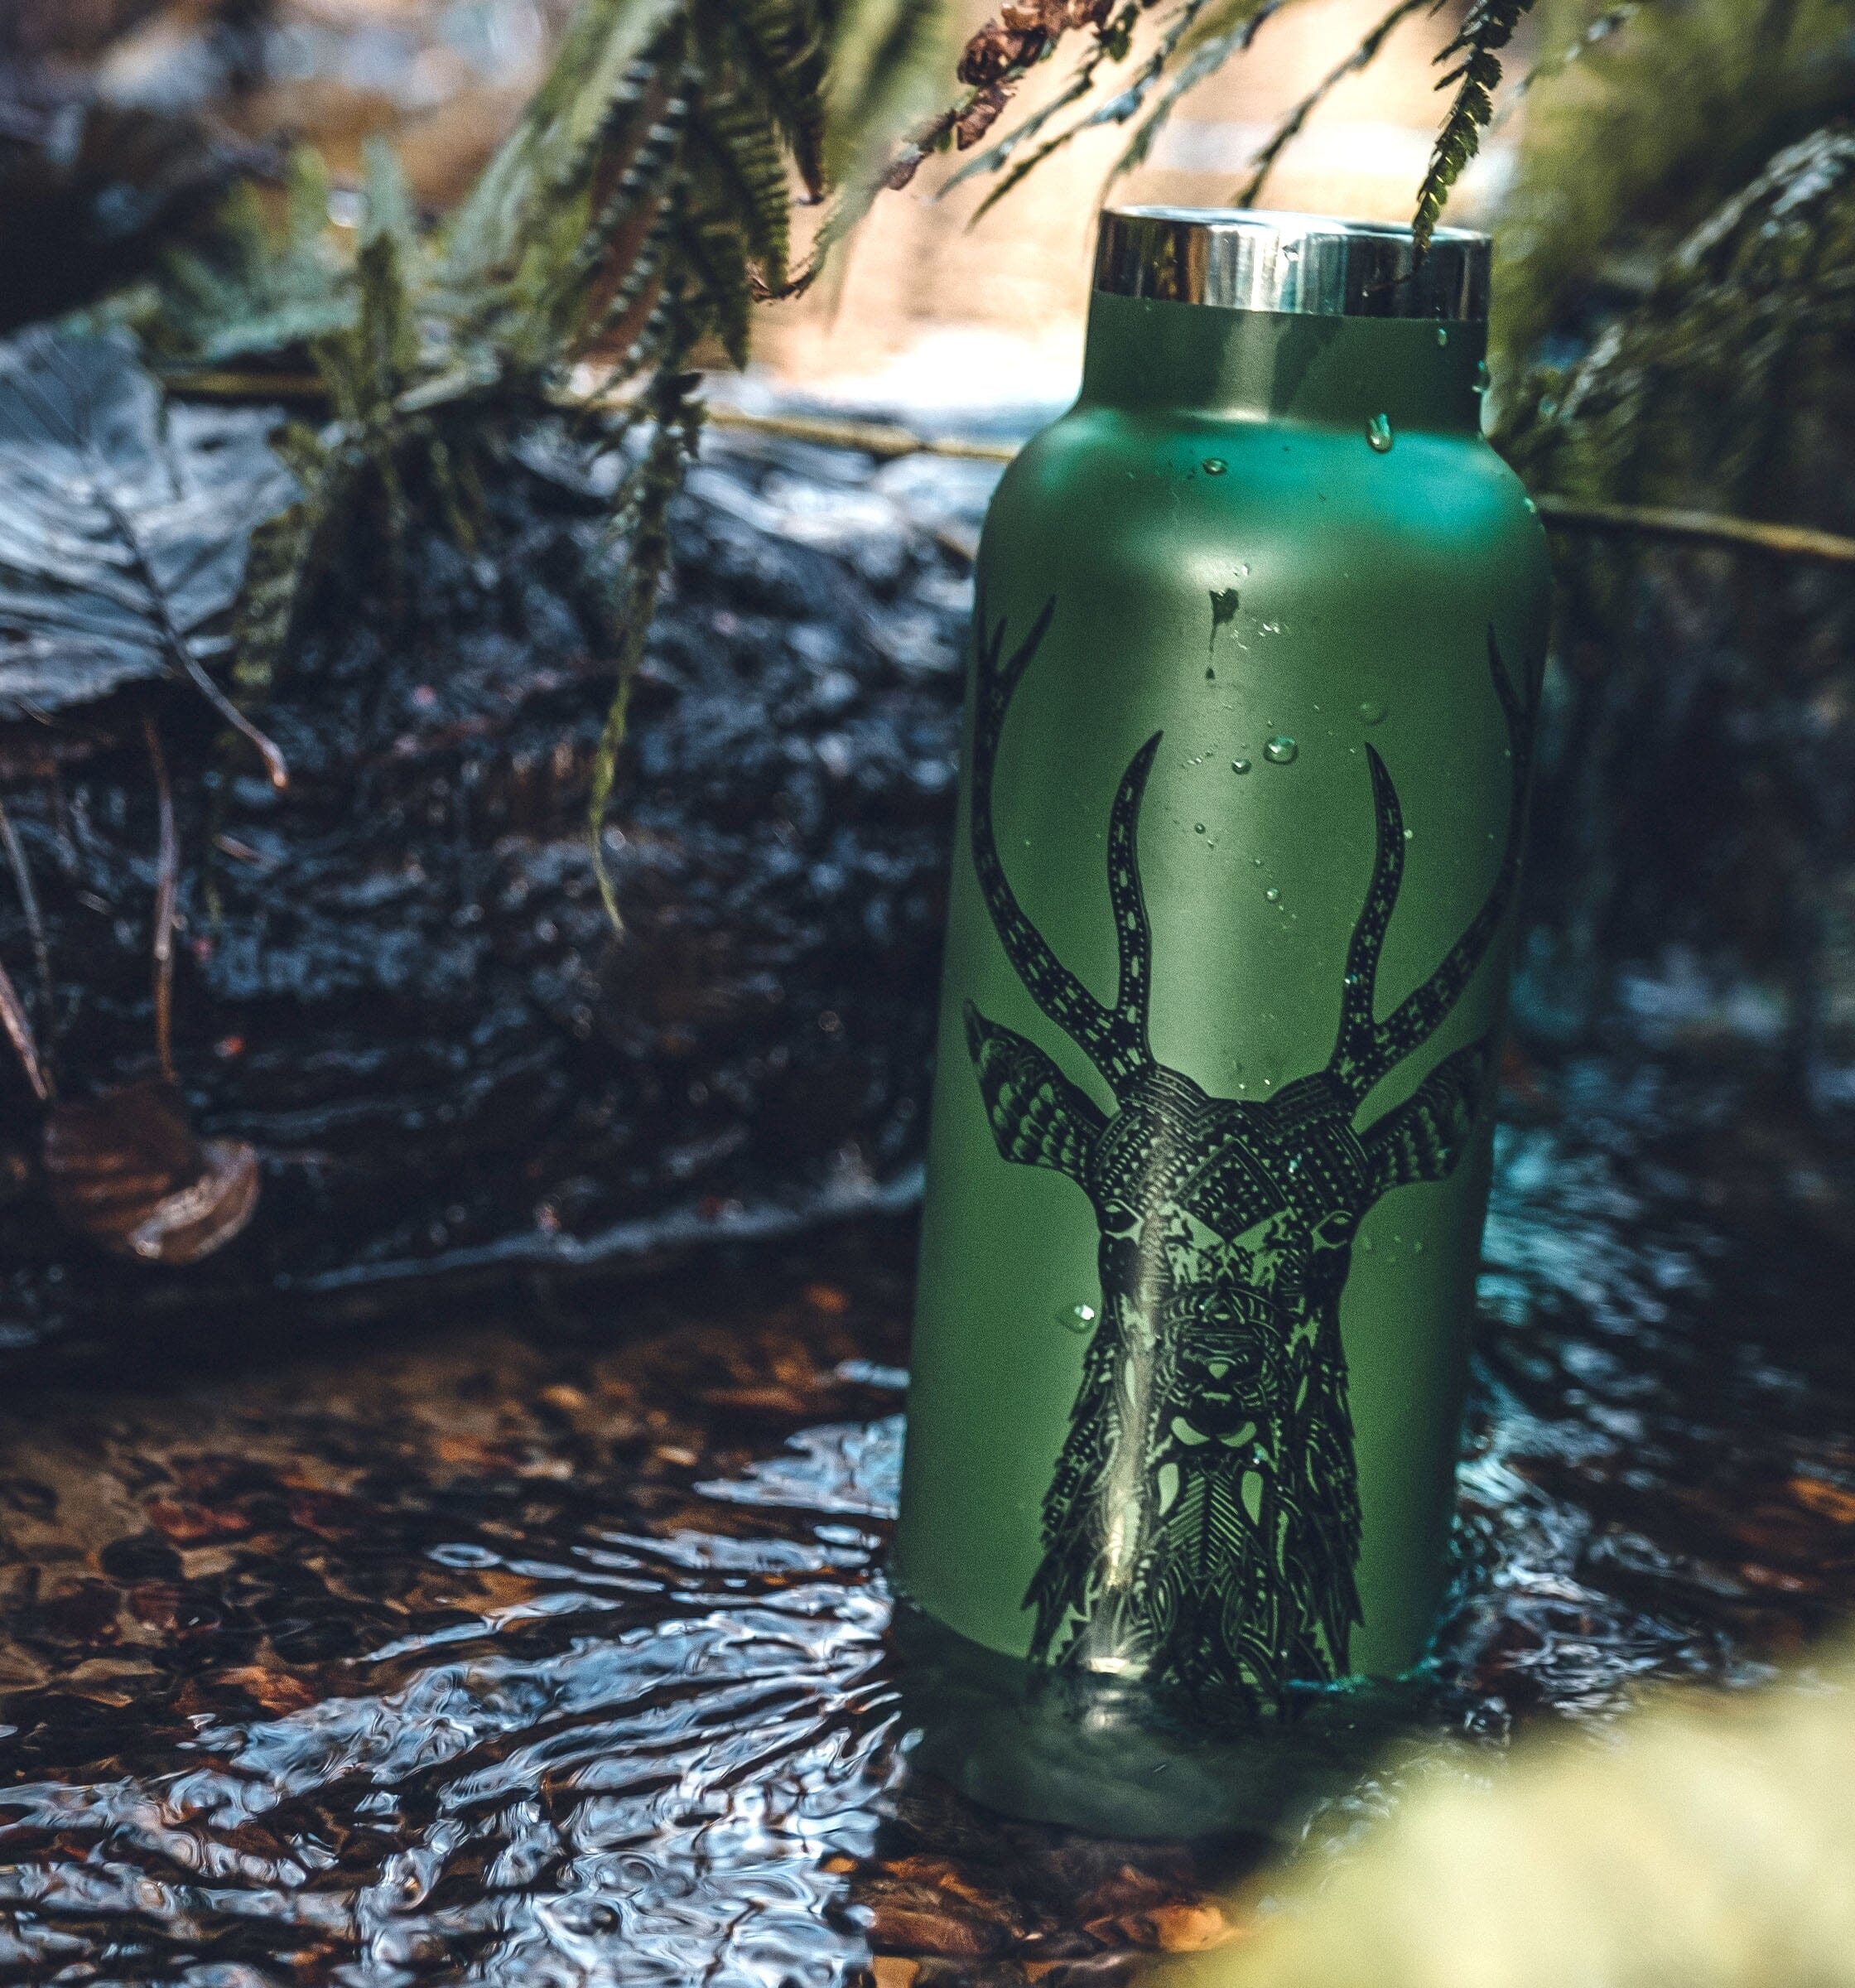 The Stag Water Bottle